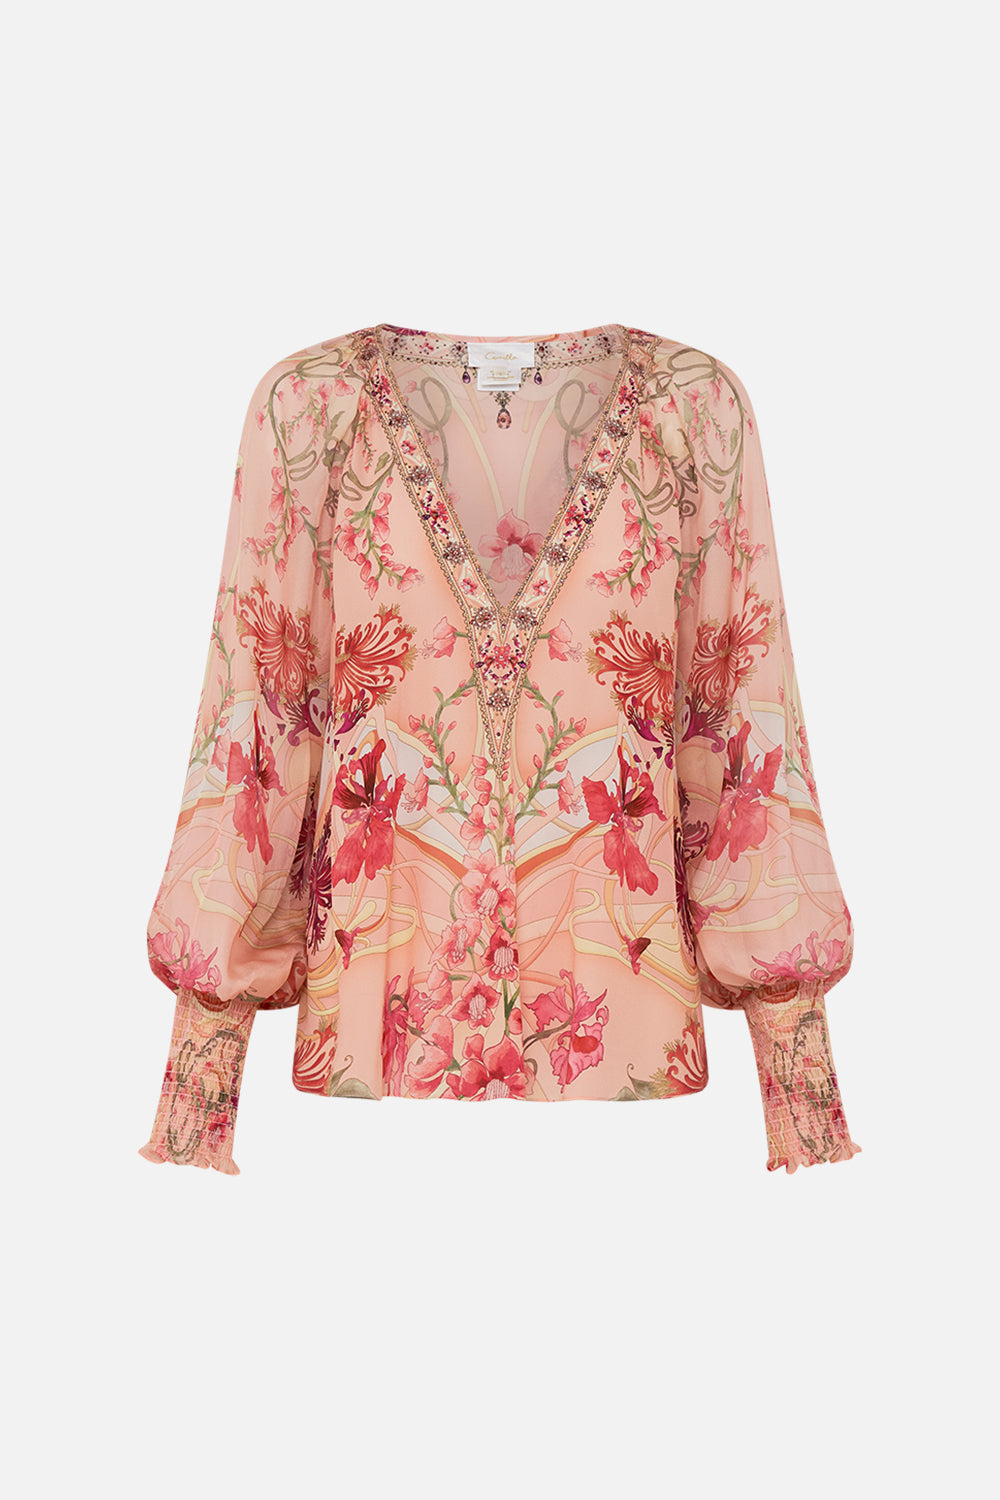 SHIRRED CUFF BLOUSE BLOSSOMS AND BRUSHSTROKES